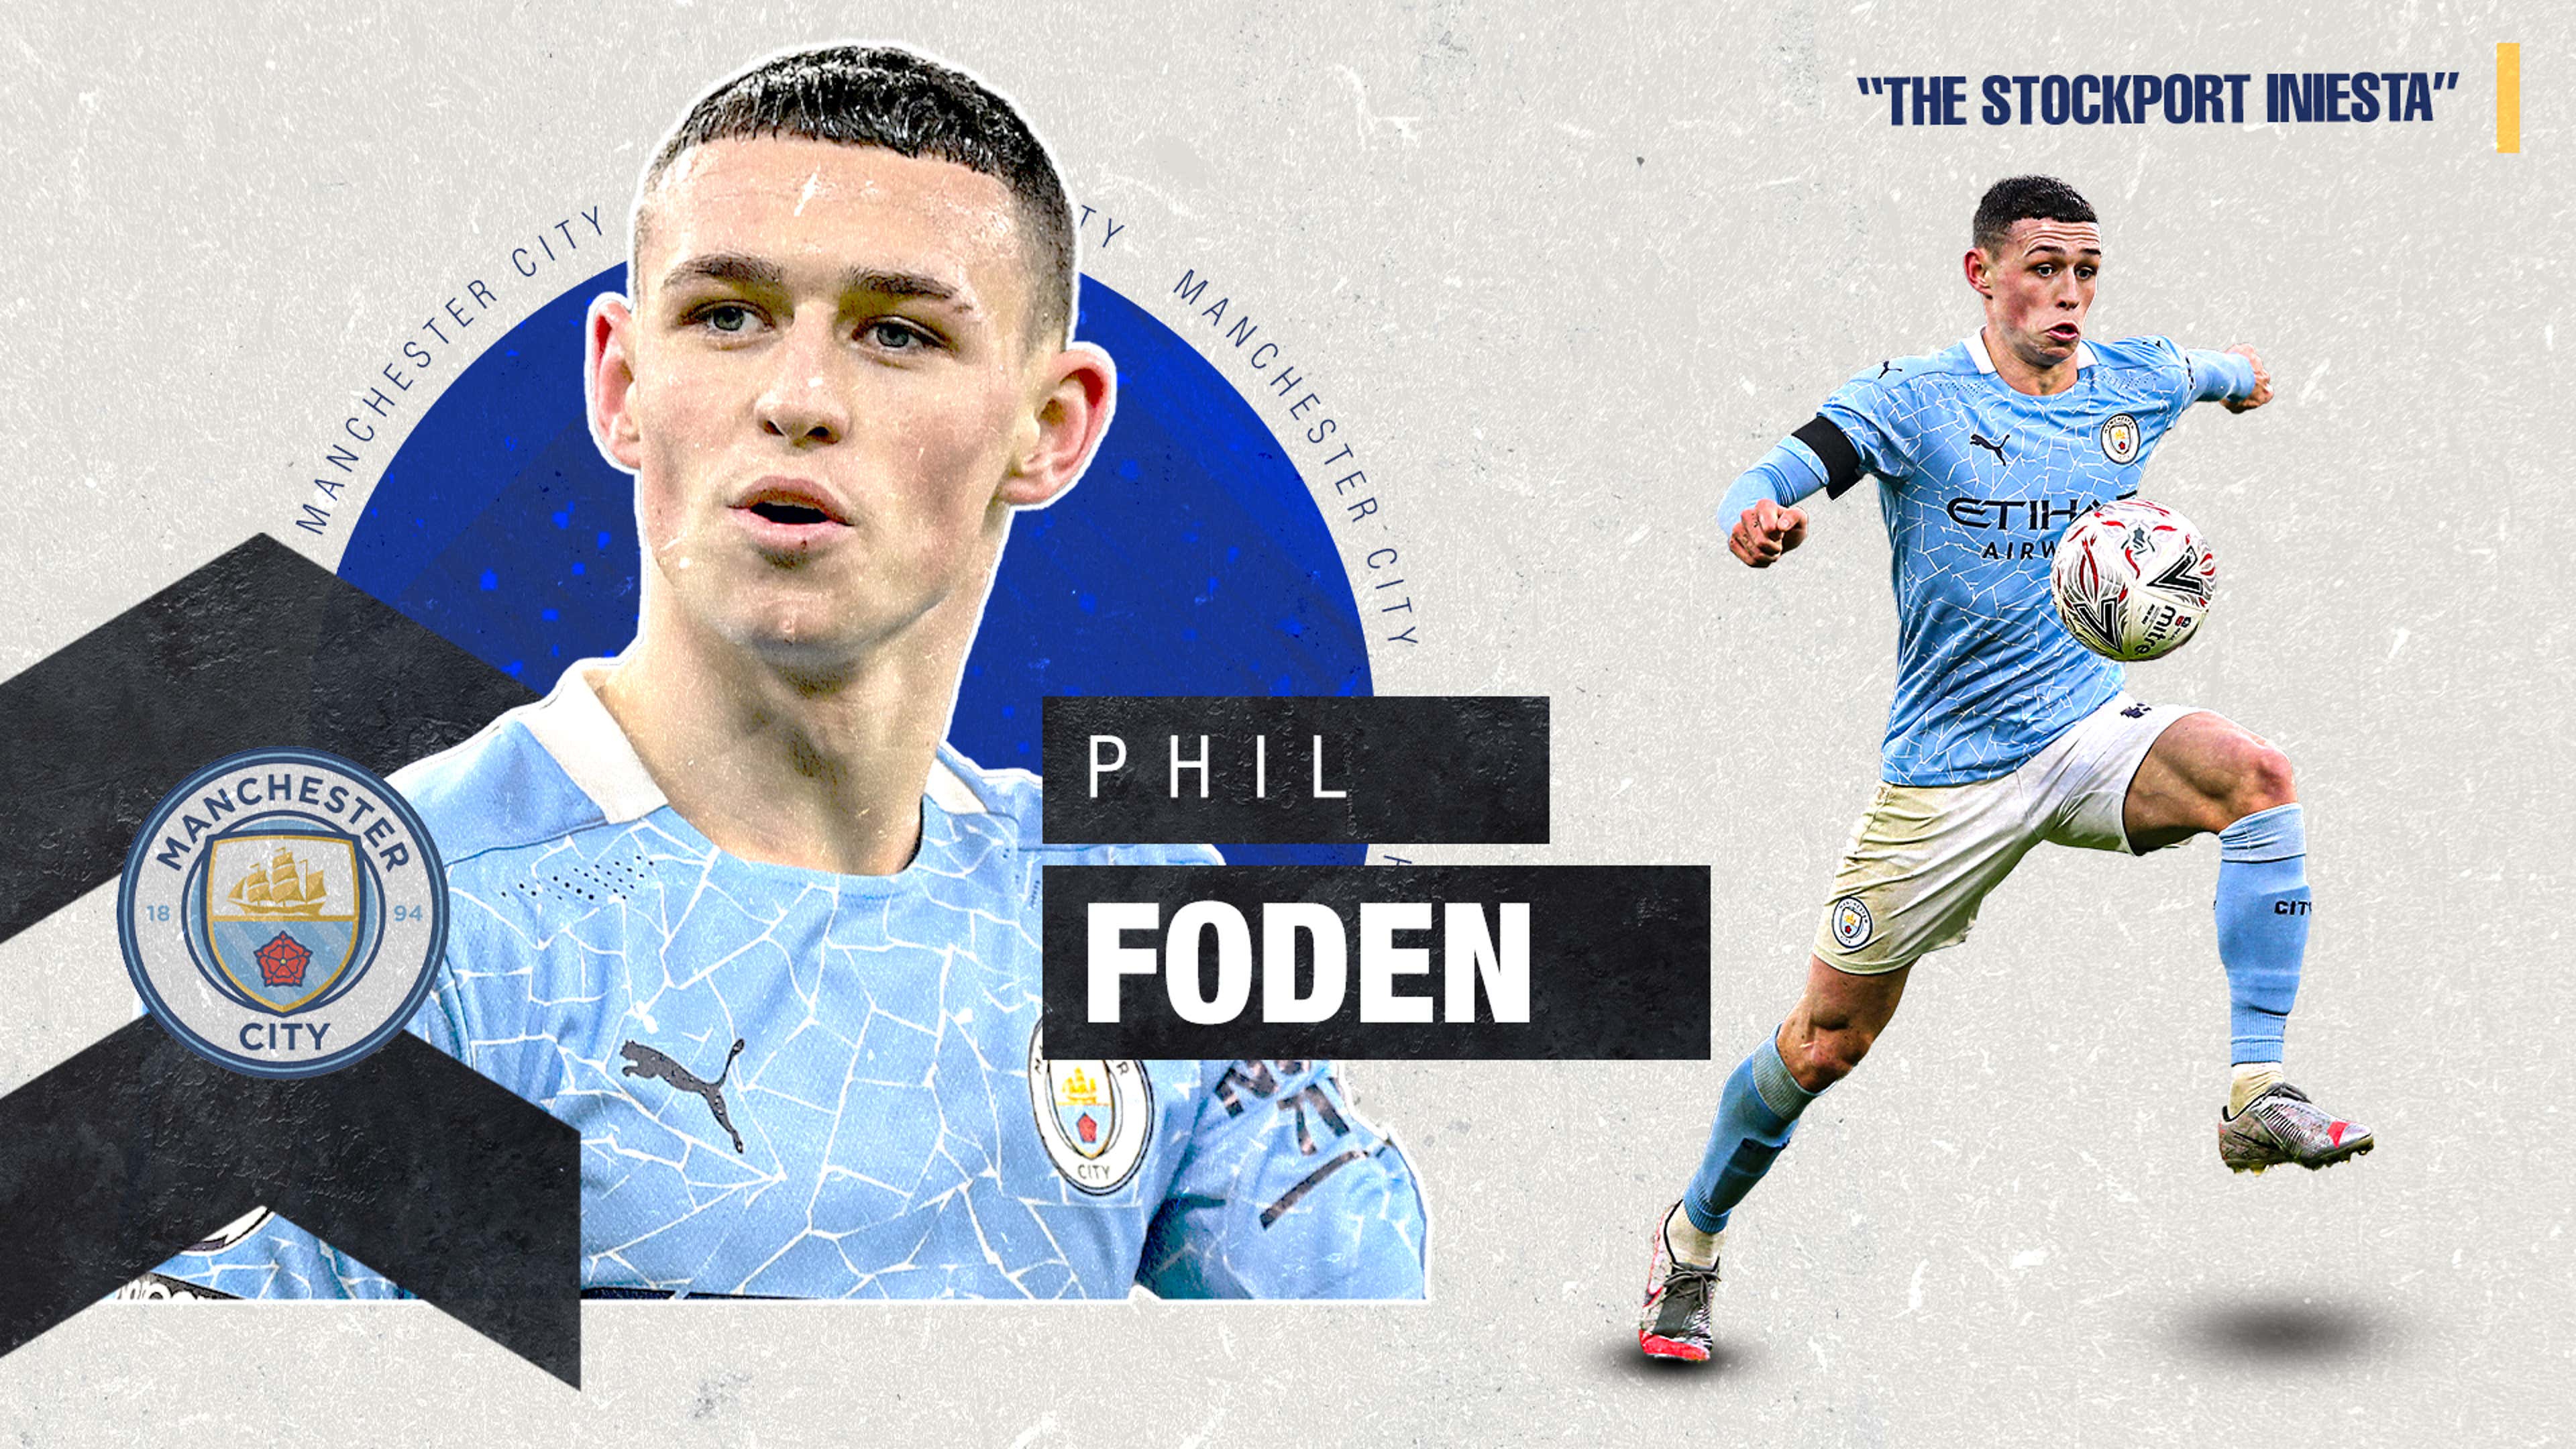 Mbappe, Foden? 'The Stockport Iniesta' he belongs among Europe's new superstars US